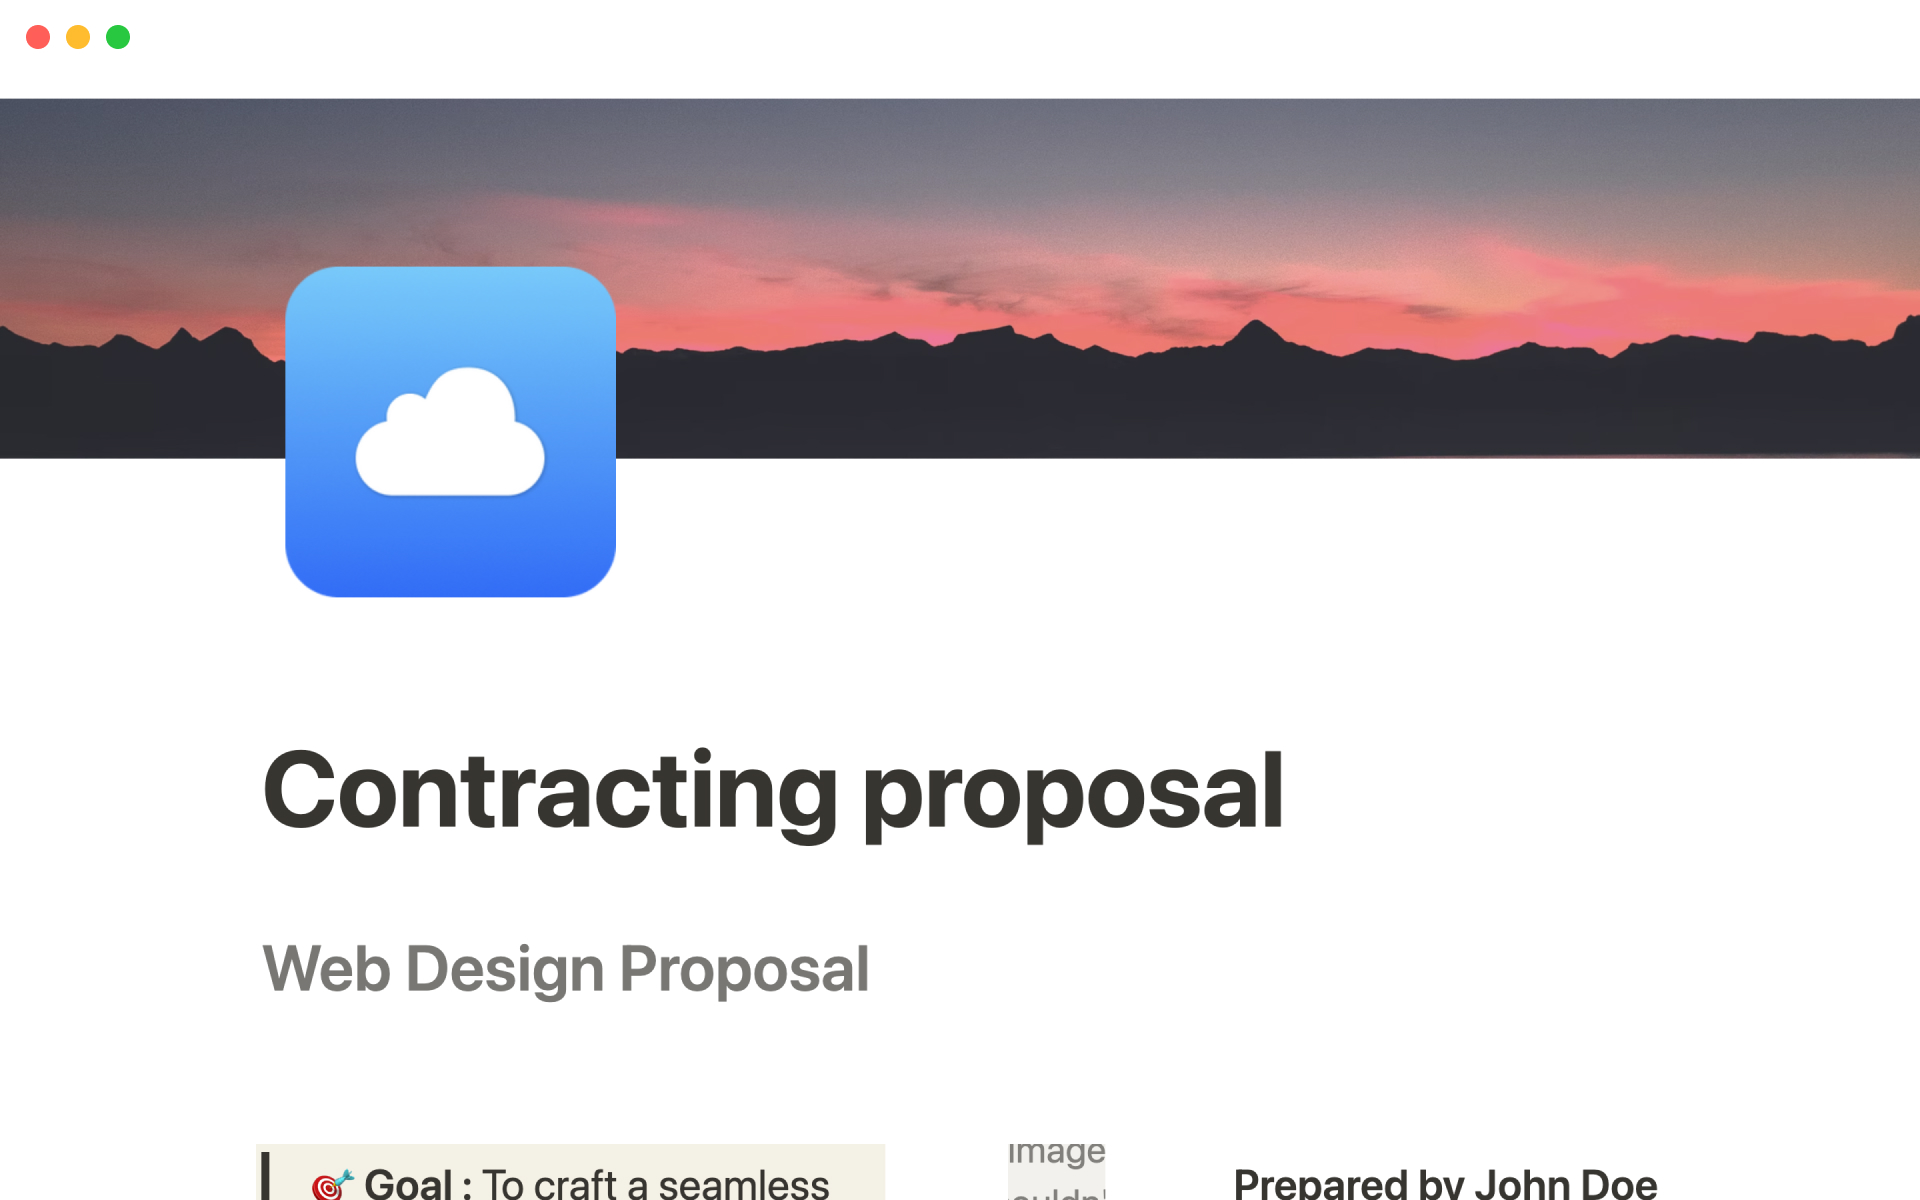 Send proposals and manage them all in one place.